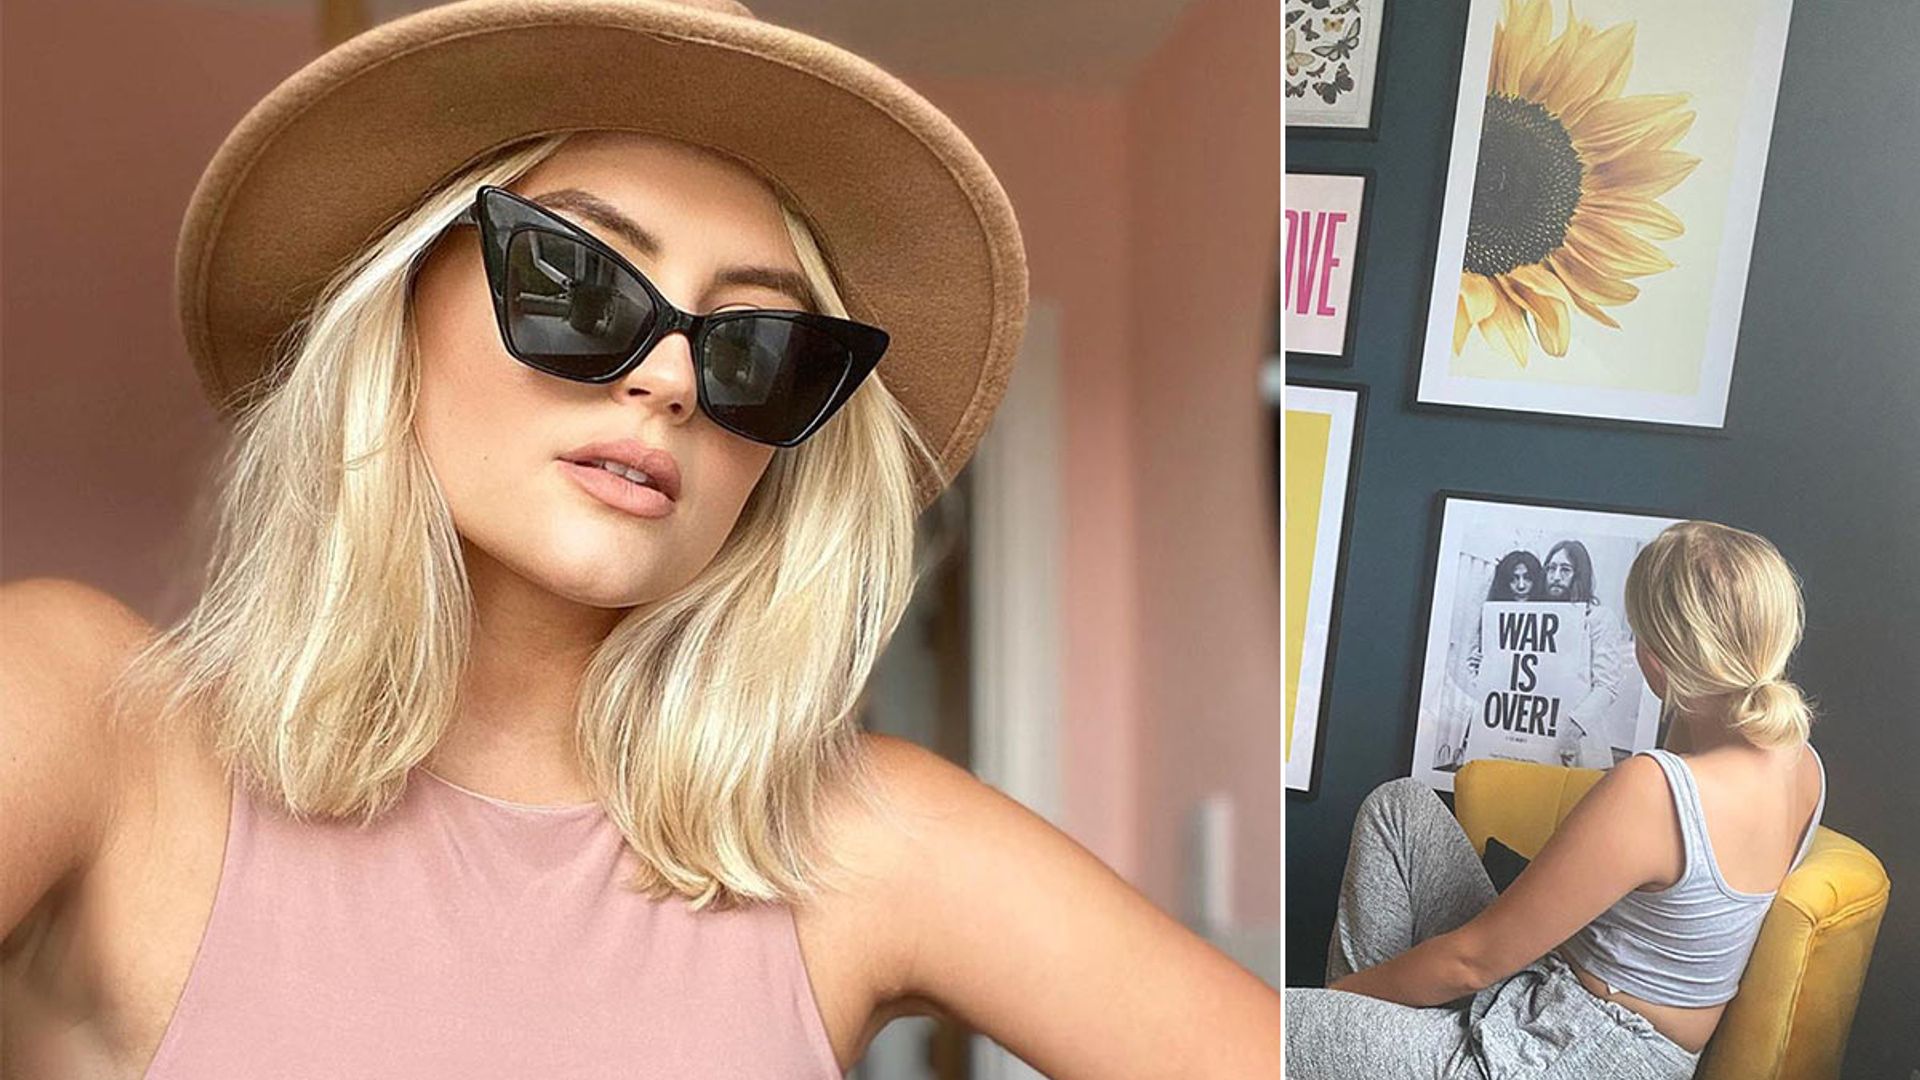 Lucy Fallon just gave her bedroom a major makeover - and fans are divided